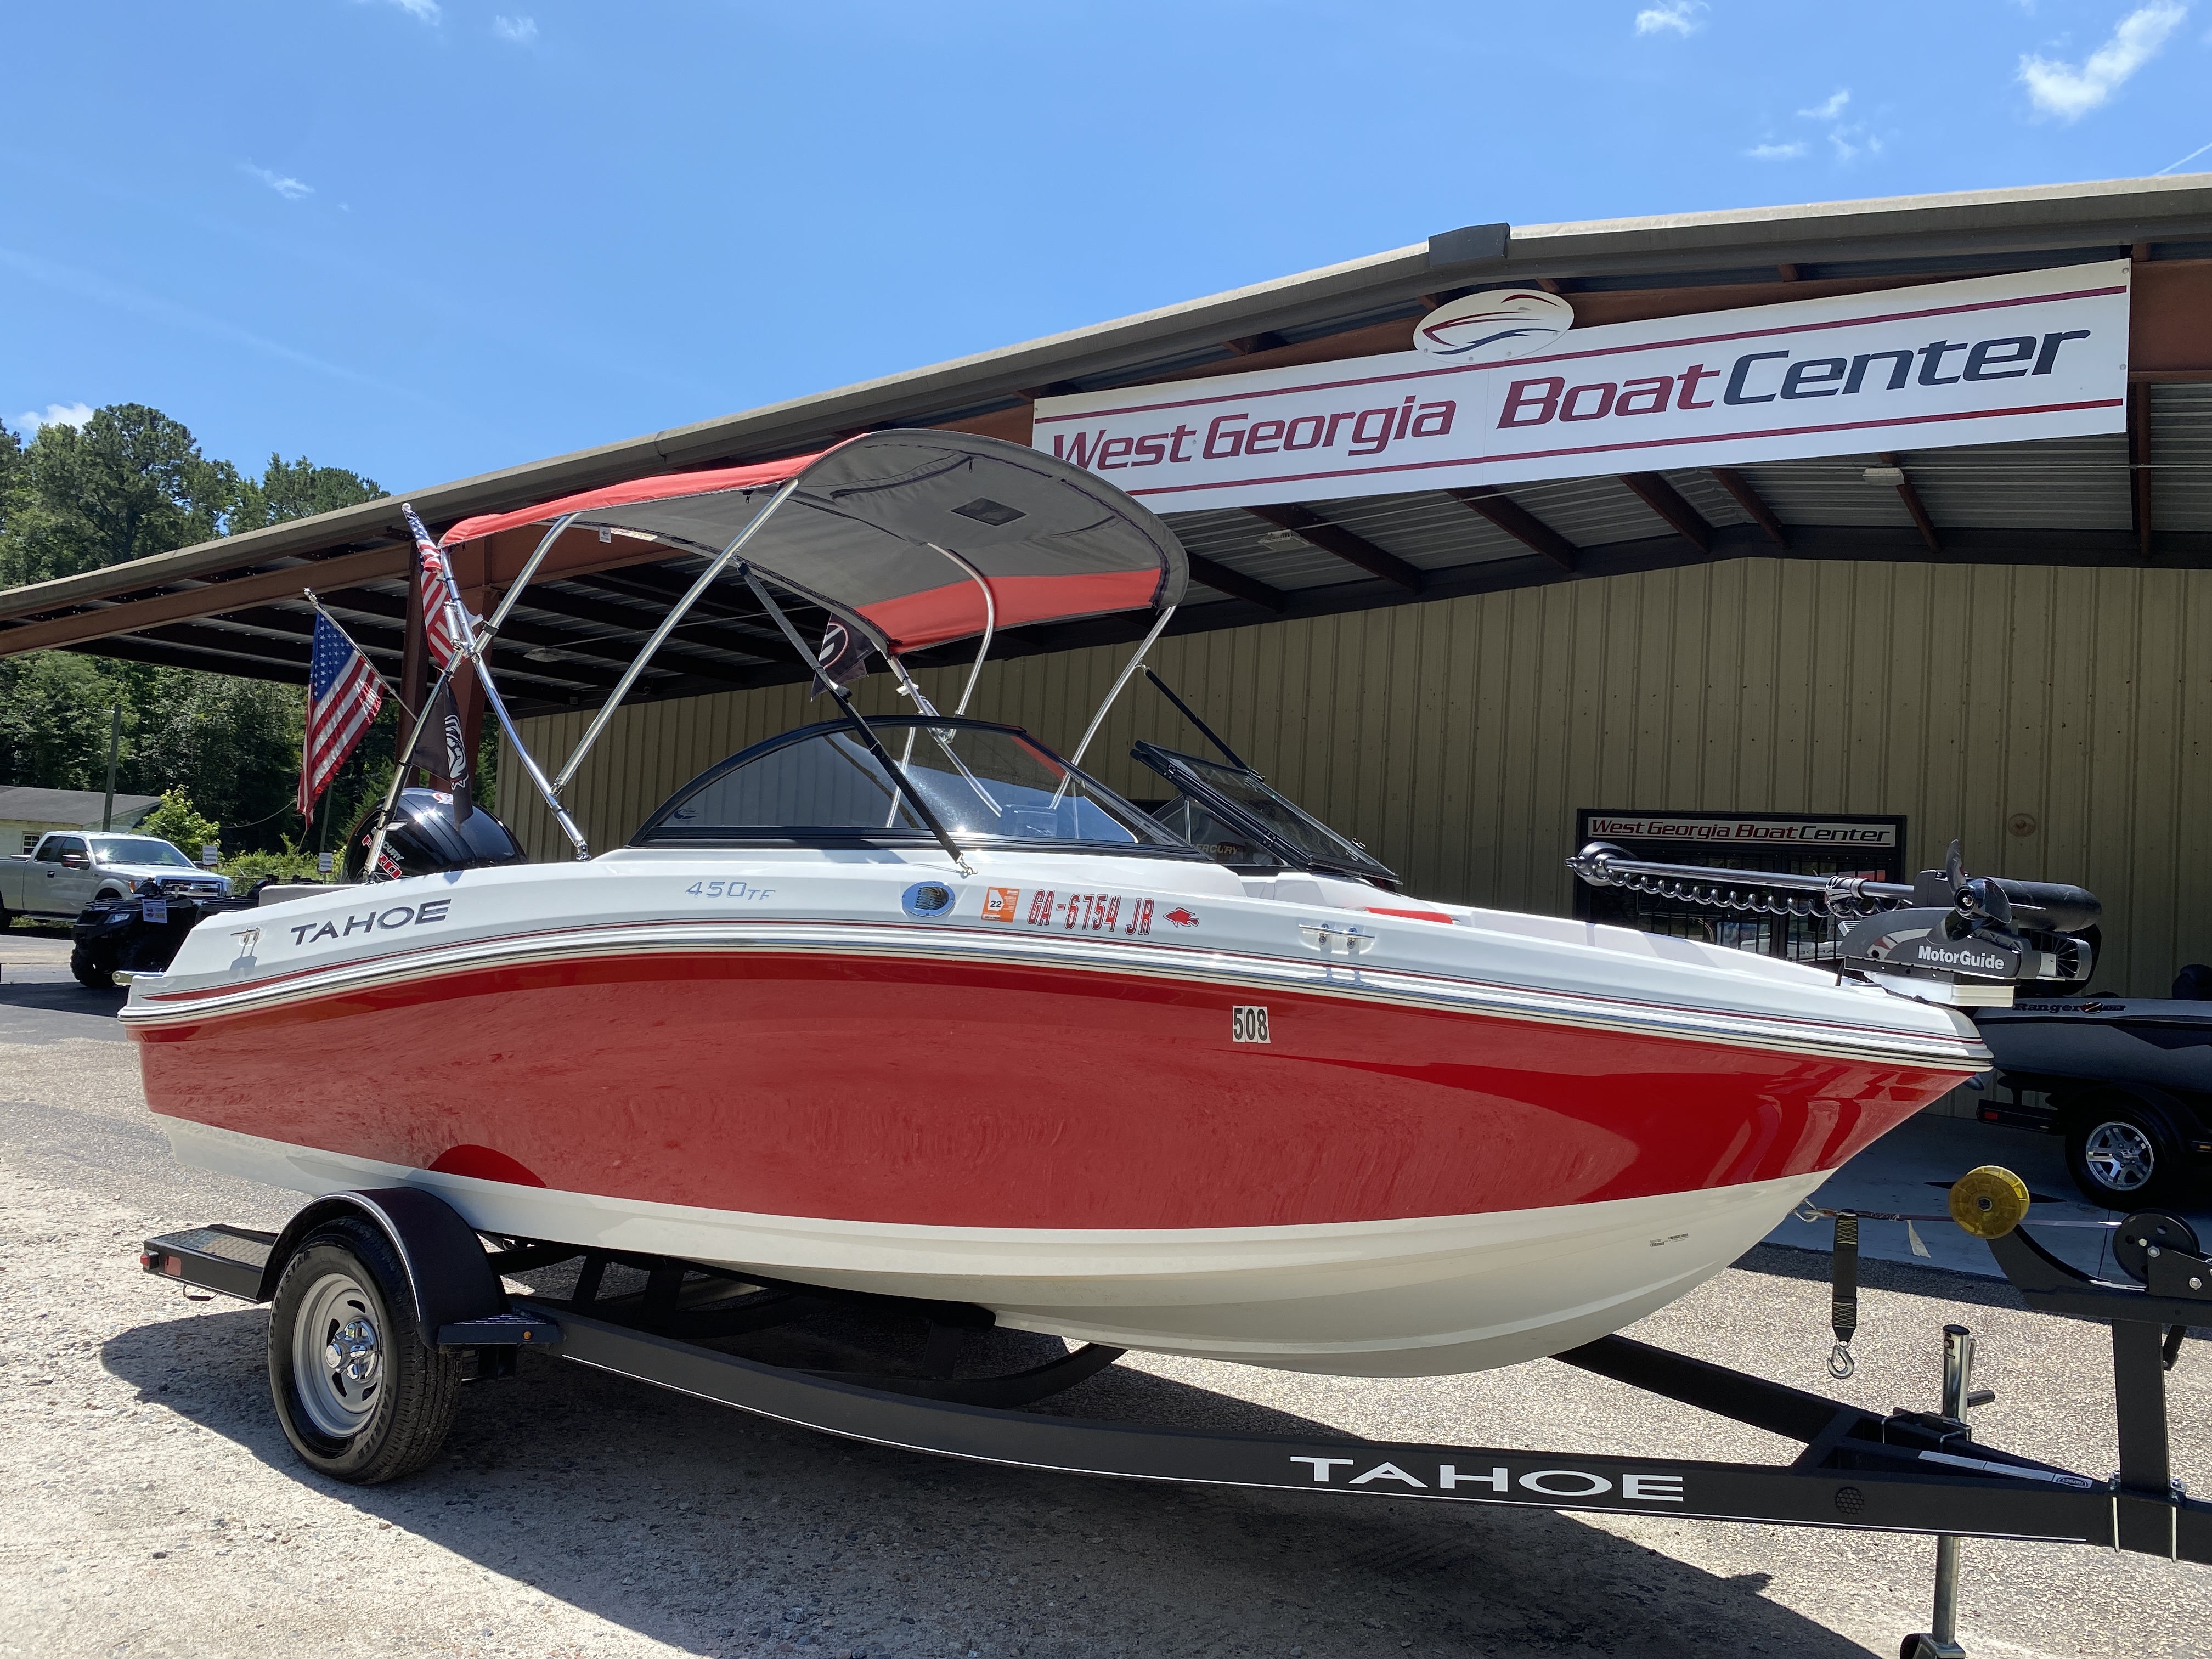 2019 Tahoe boat for sale, model of the boat is 450 TF & Image # 9 of 23